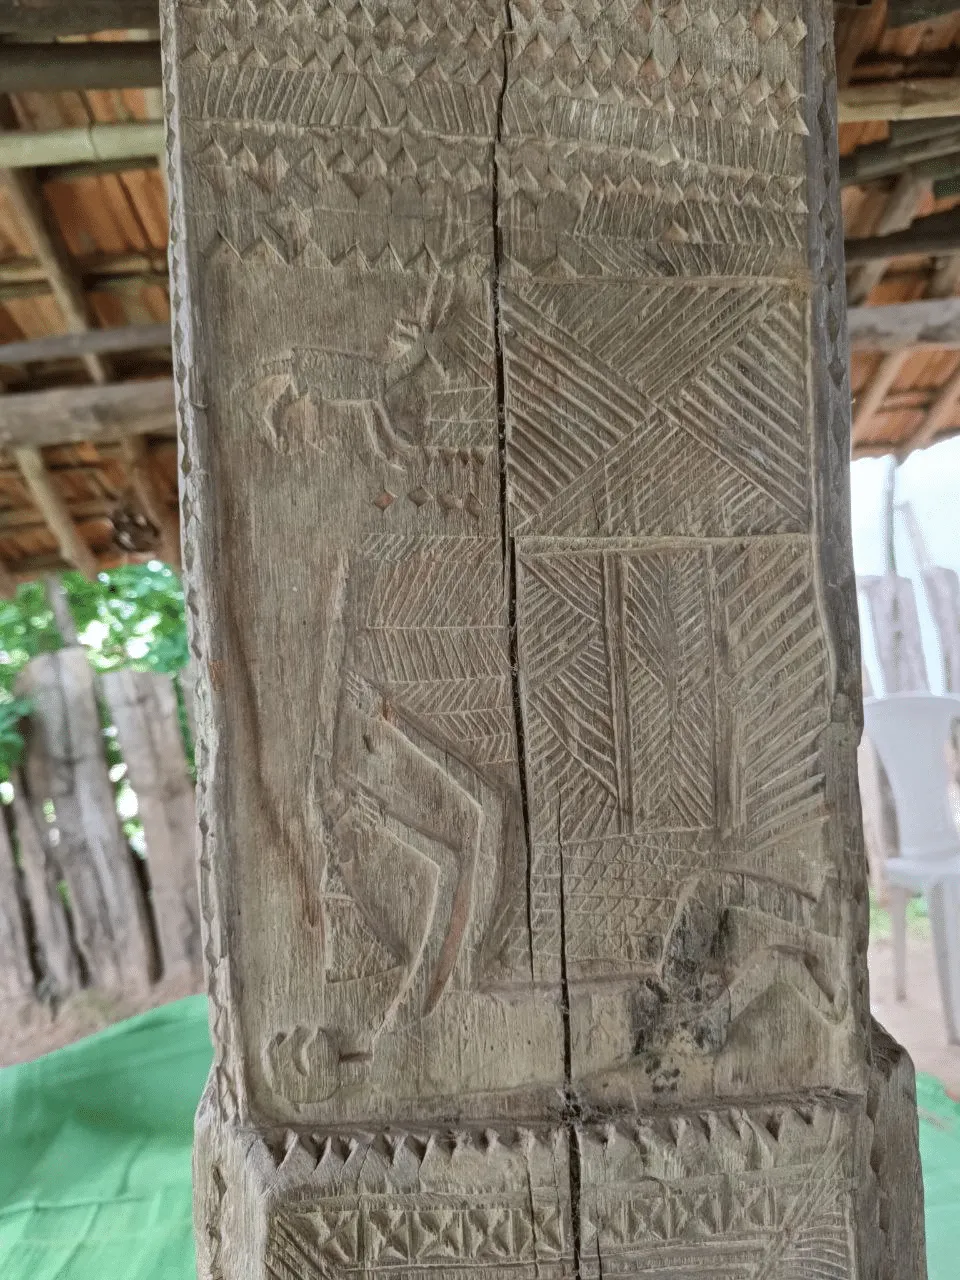 A hunter with a gun, wooden carvings in Gotul, the community centre